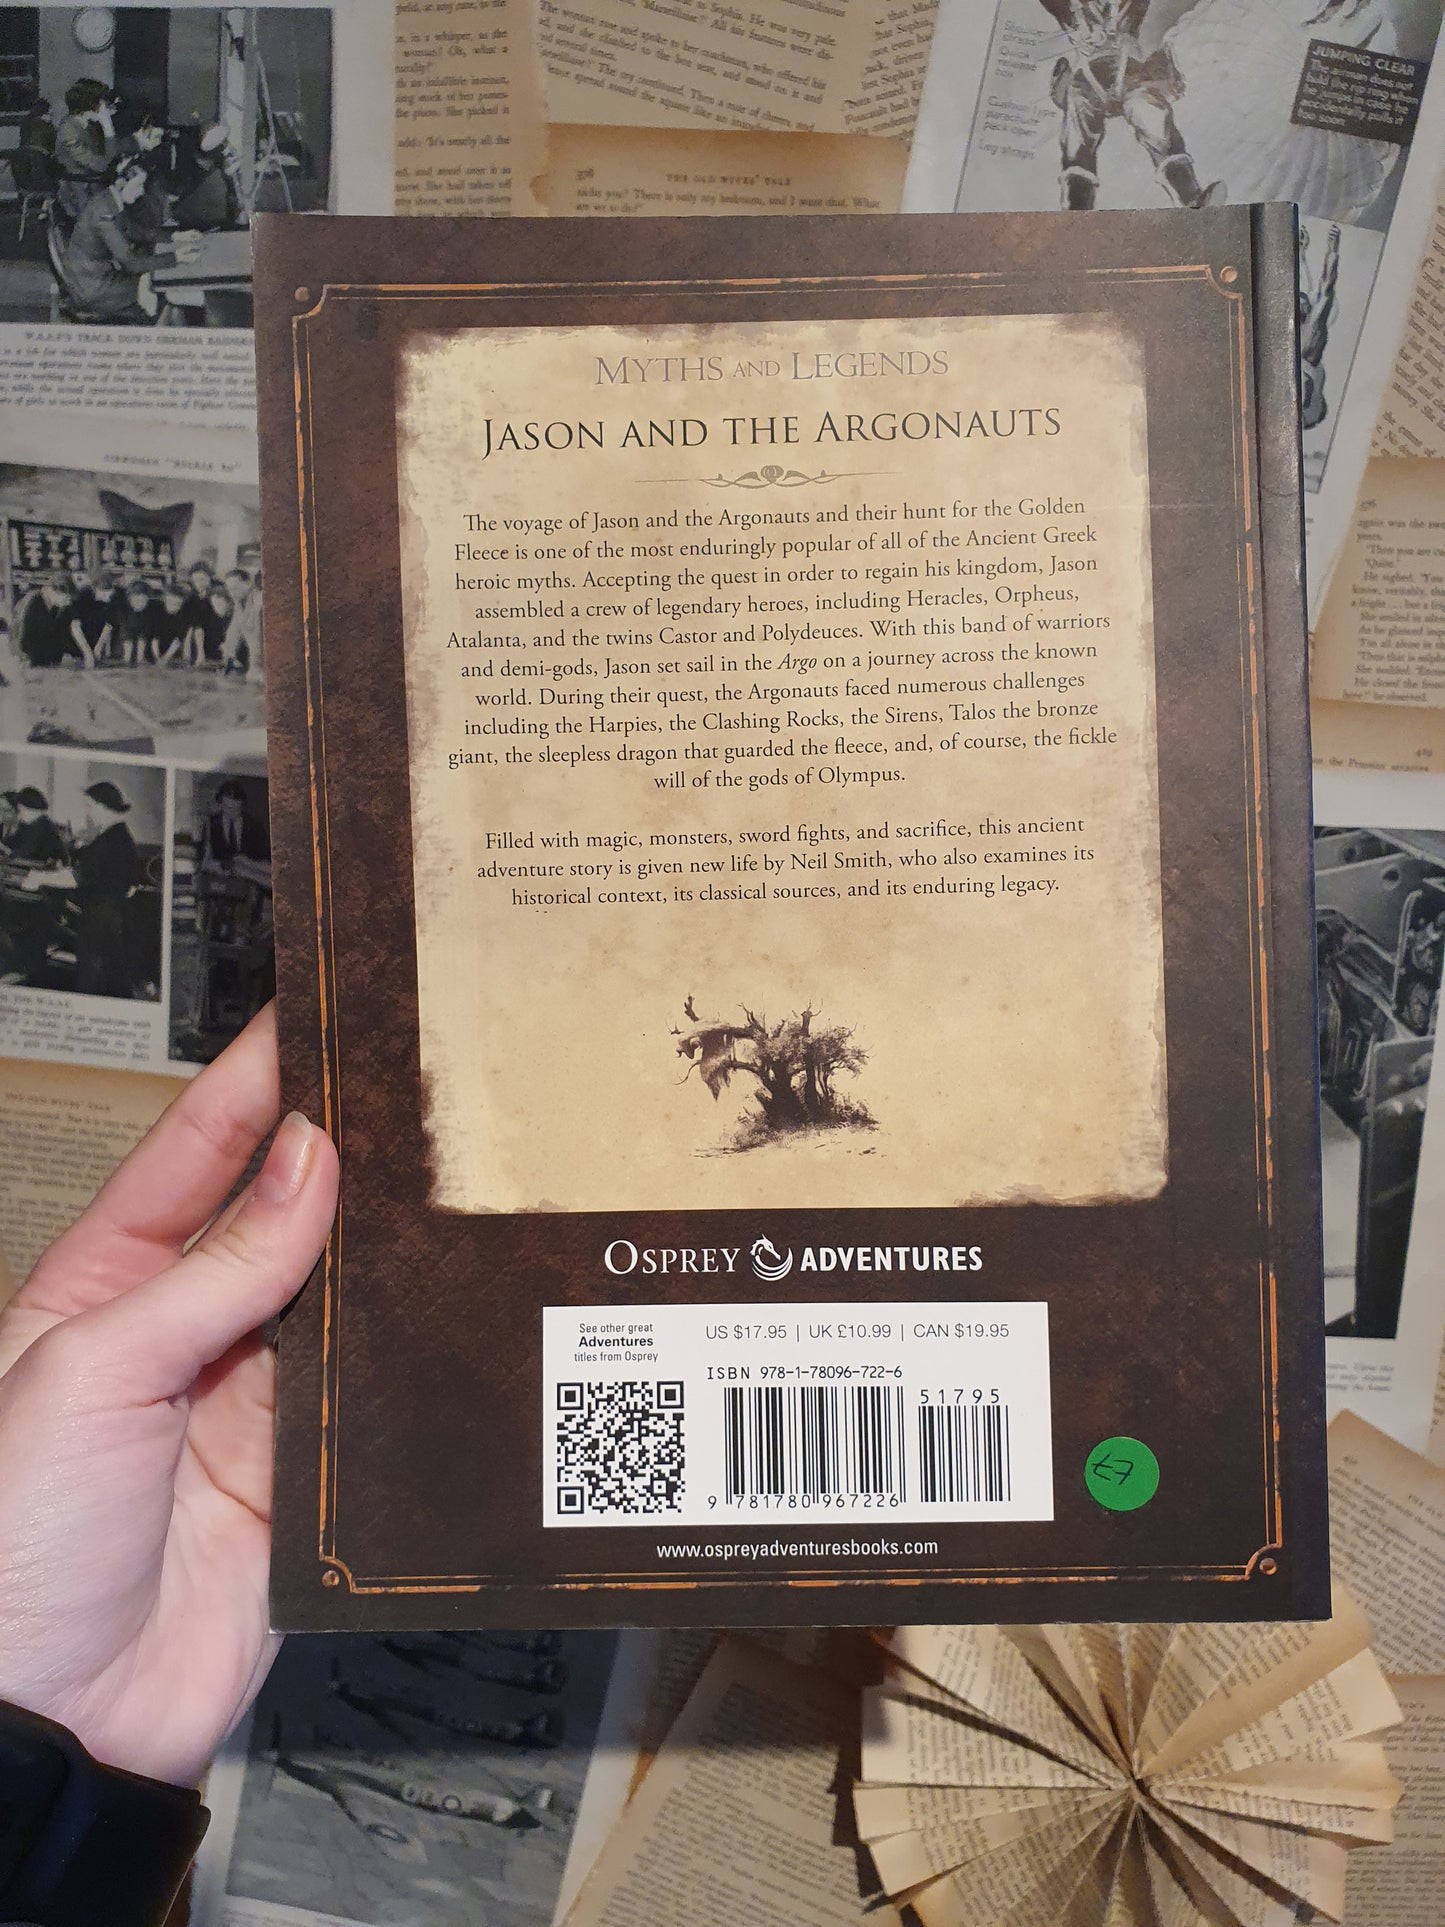 Myths and Legends: Jason and the Argonauts by Neil Smith (2013)